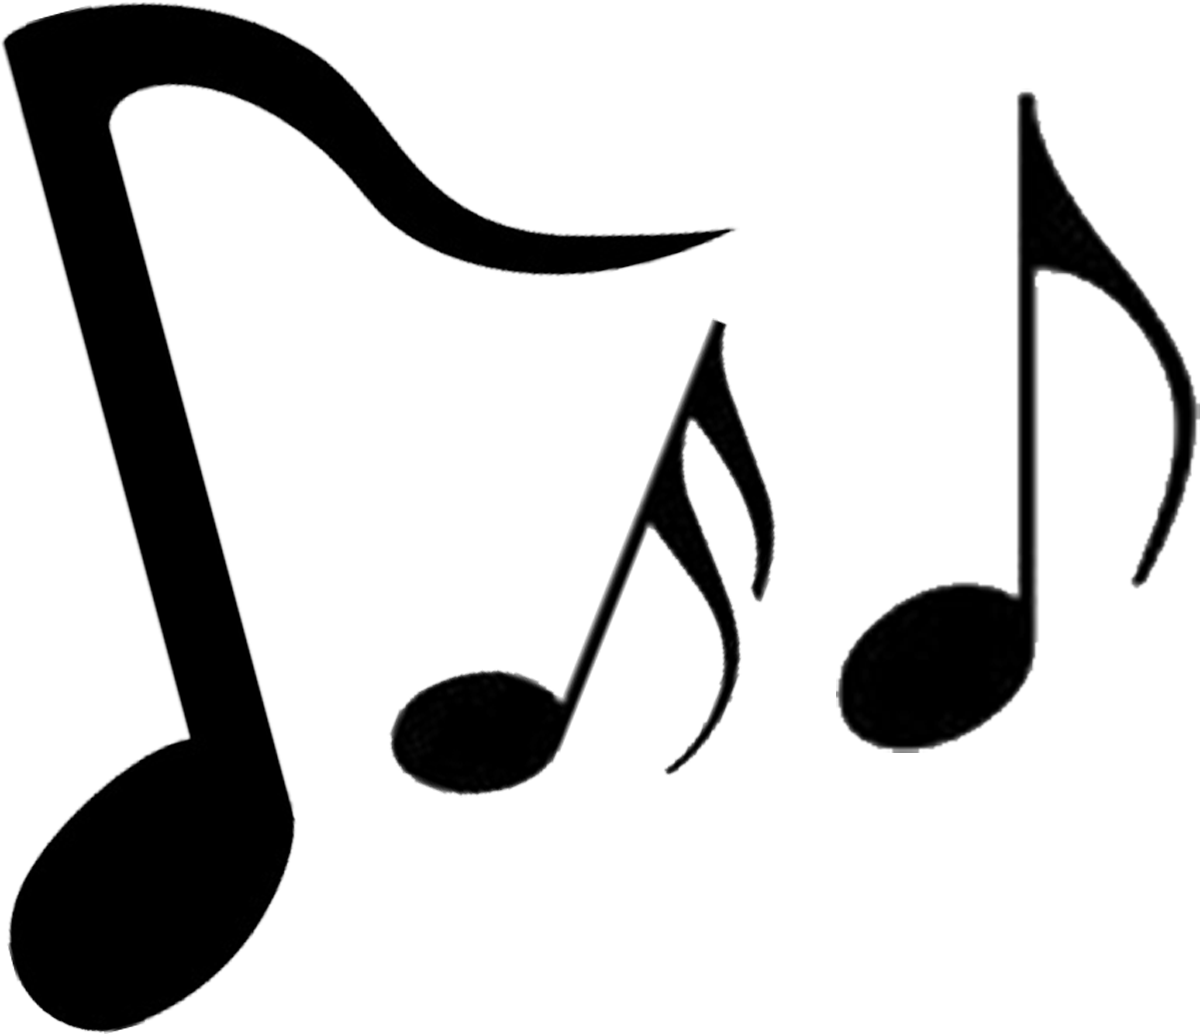 Music Clip Art For Kids | Clipart library - Free Clipart Images